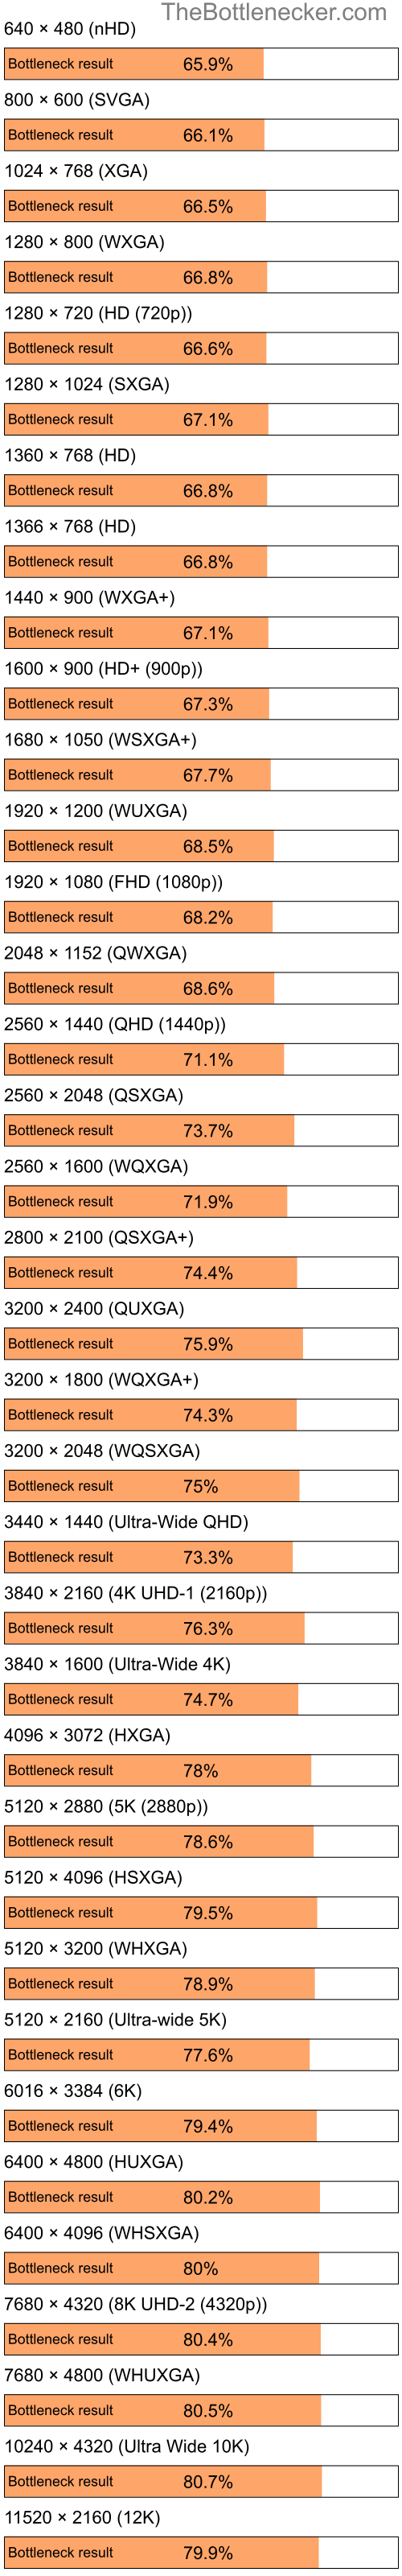 Bottleneck results by resolution for Intel Atom N270 and AMD Mobility Radeon HD 3450 in7 Days to Die